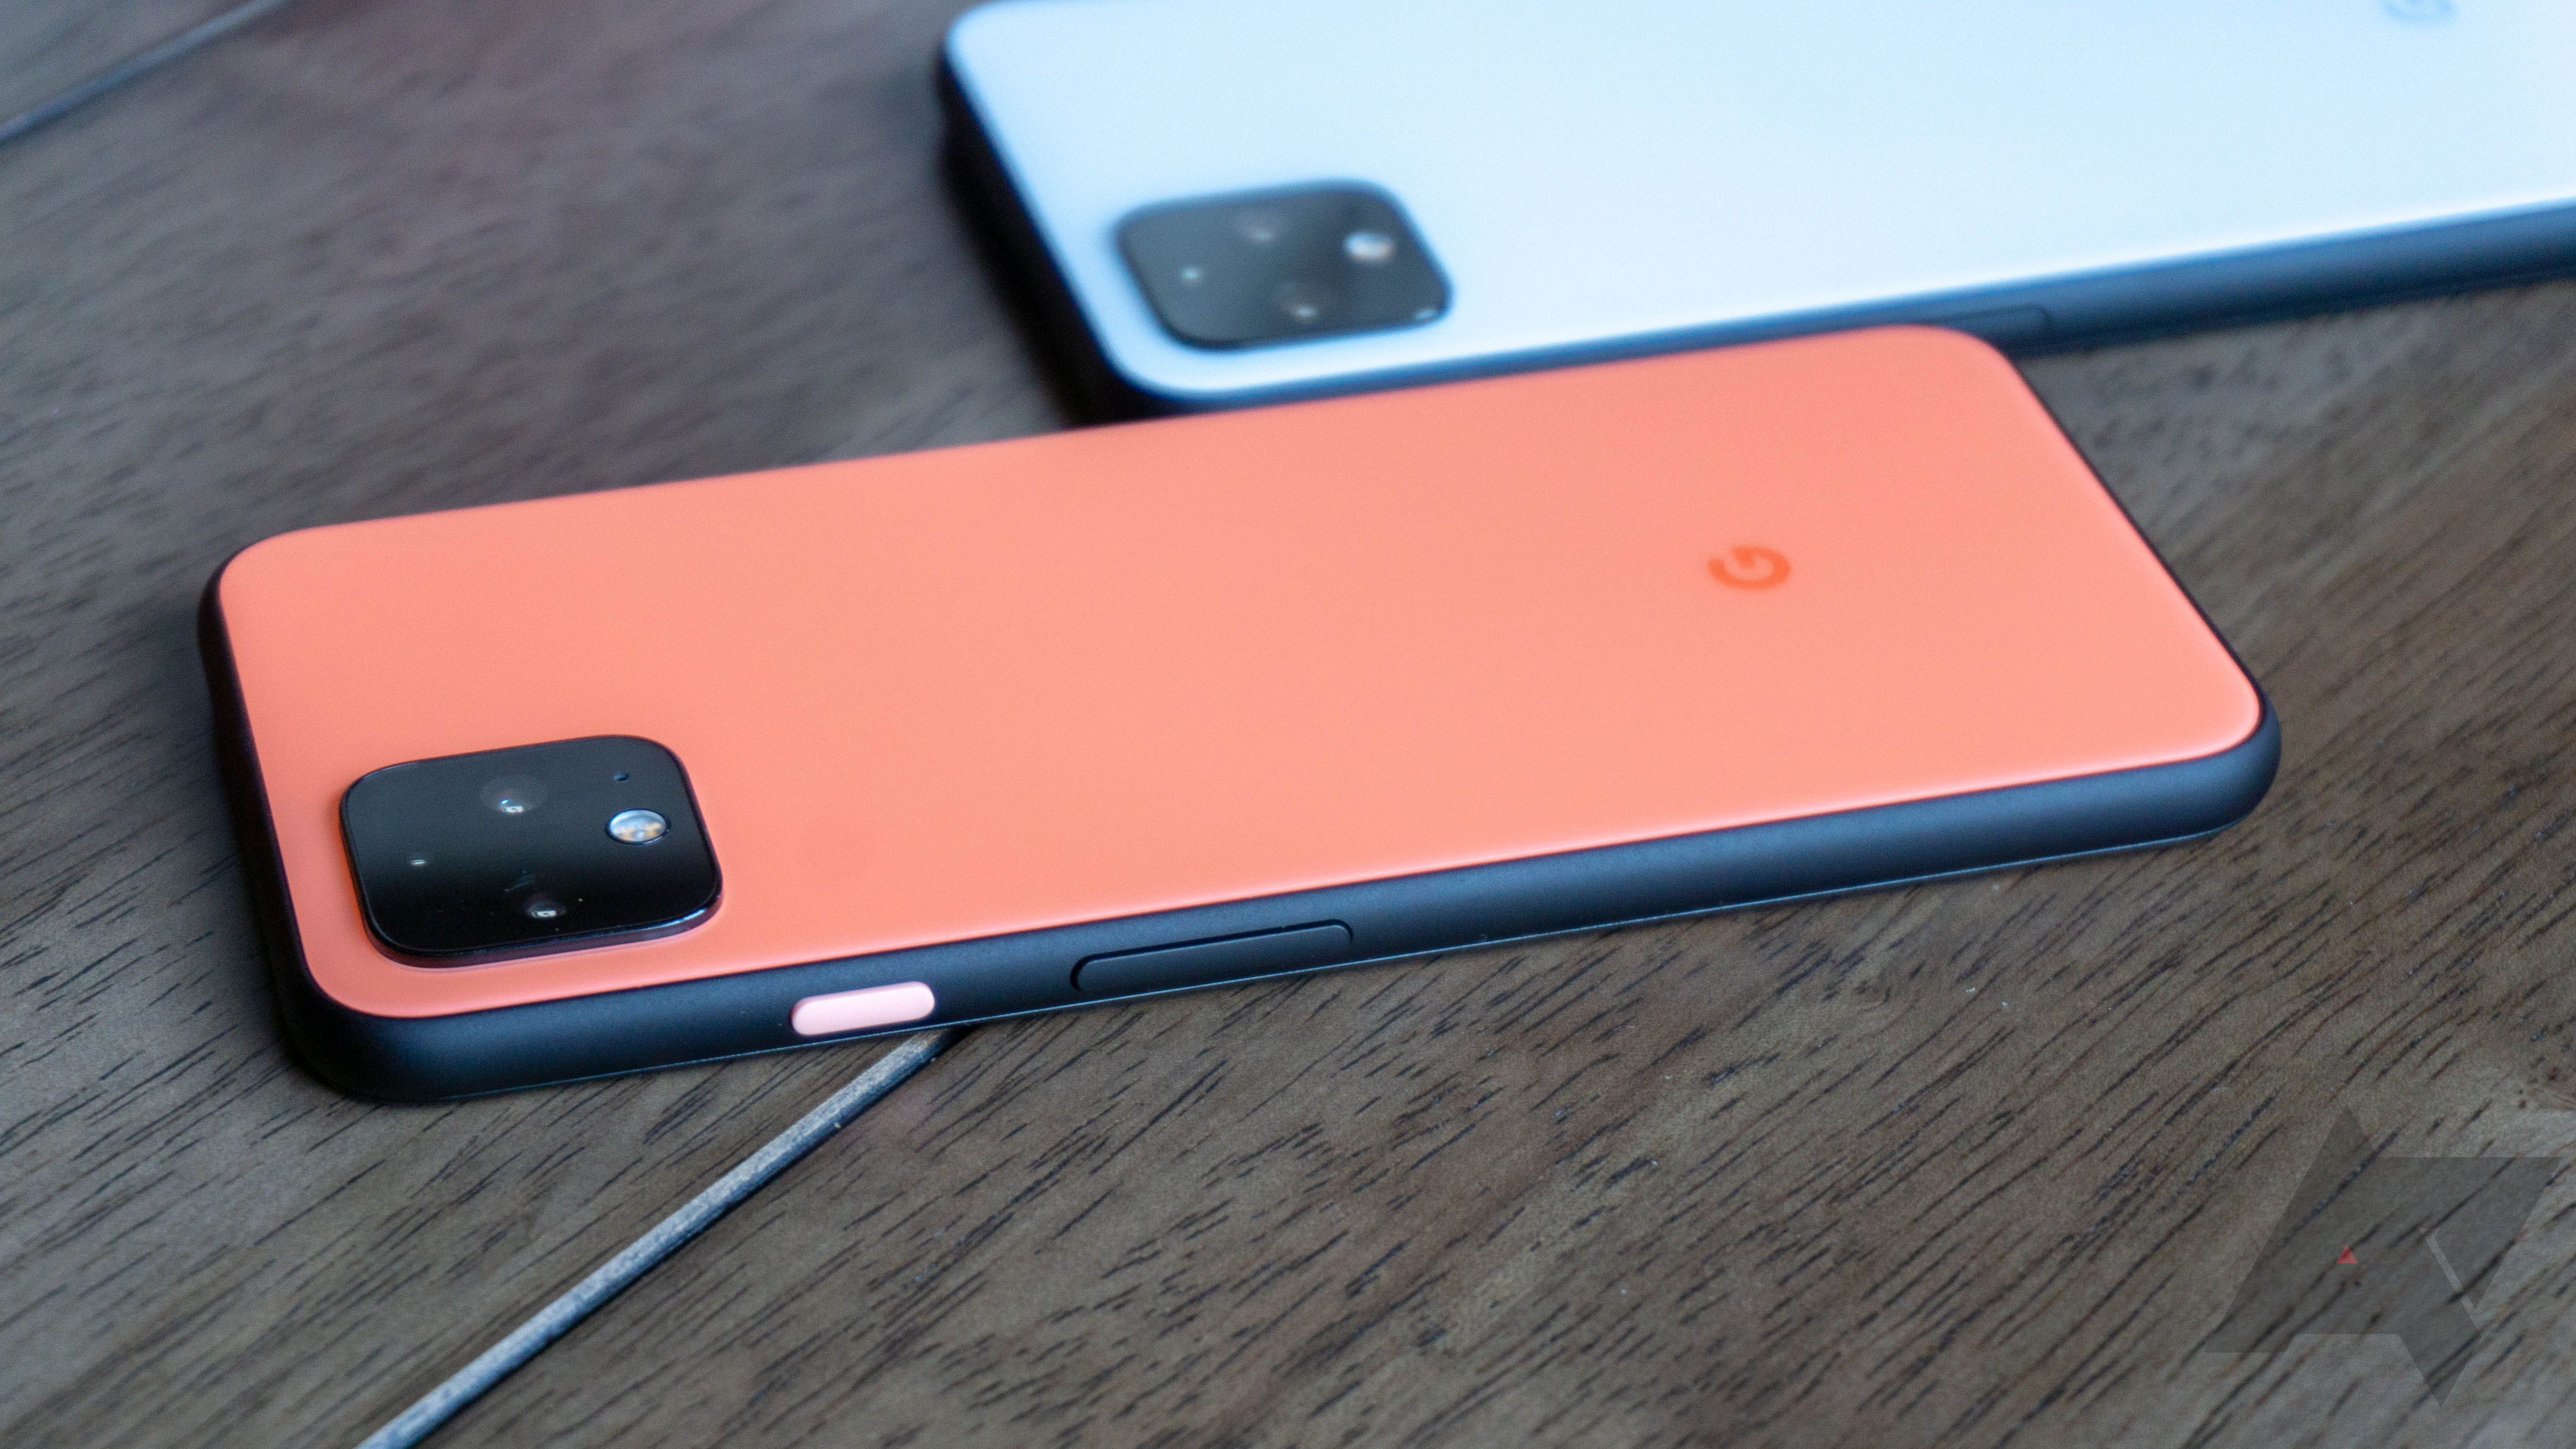 The hard-to-find 'Oh So Orange' Pixel 4 is $400 off today